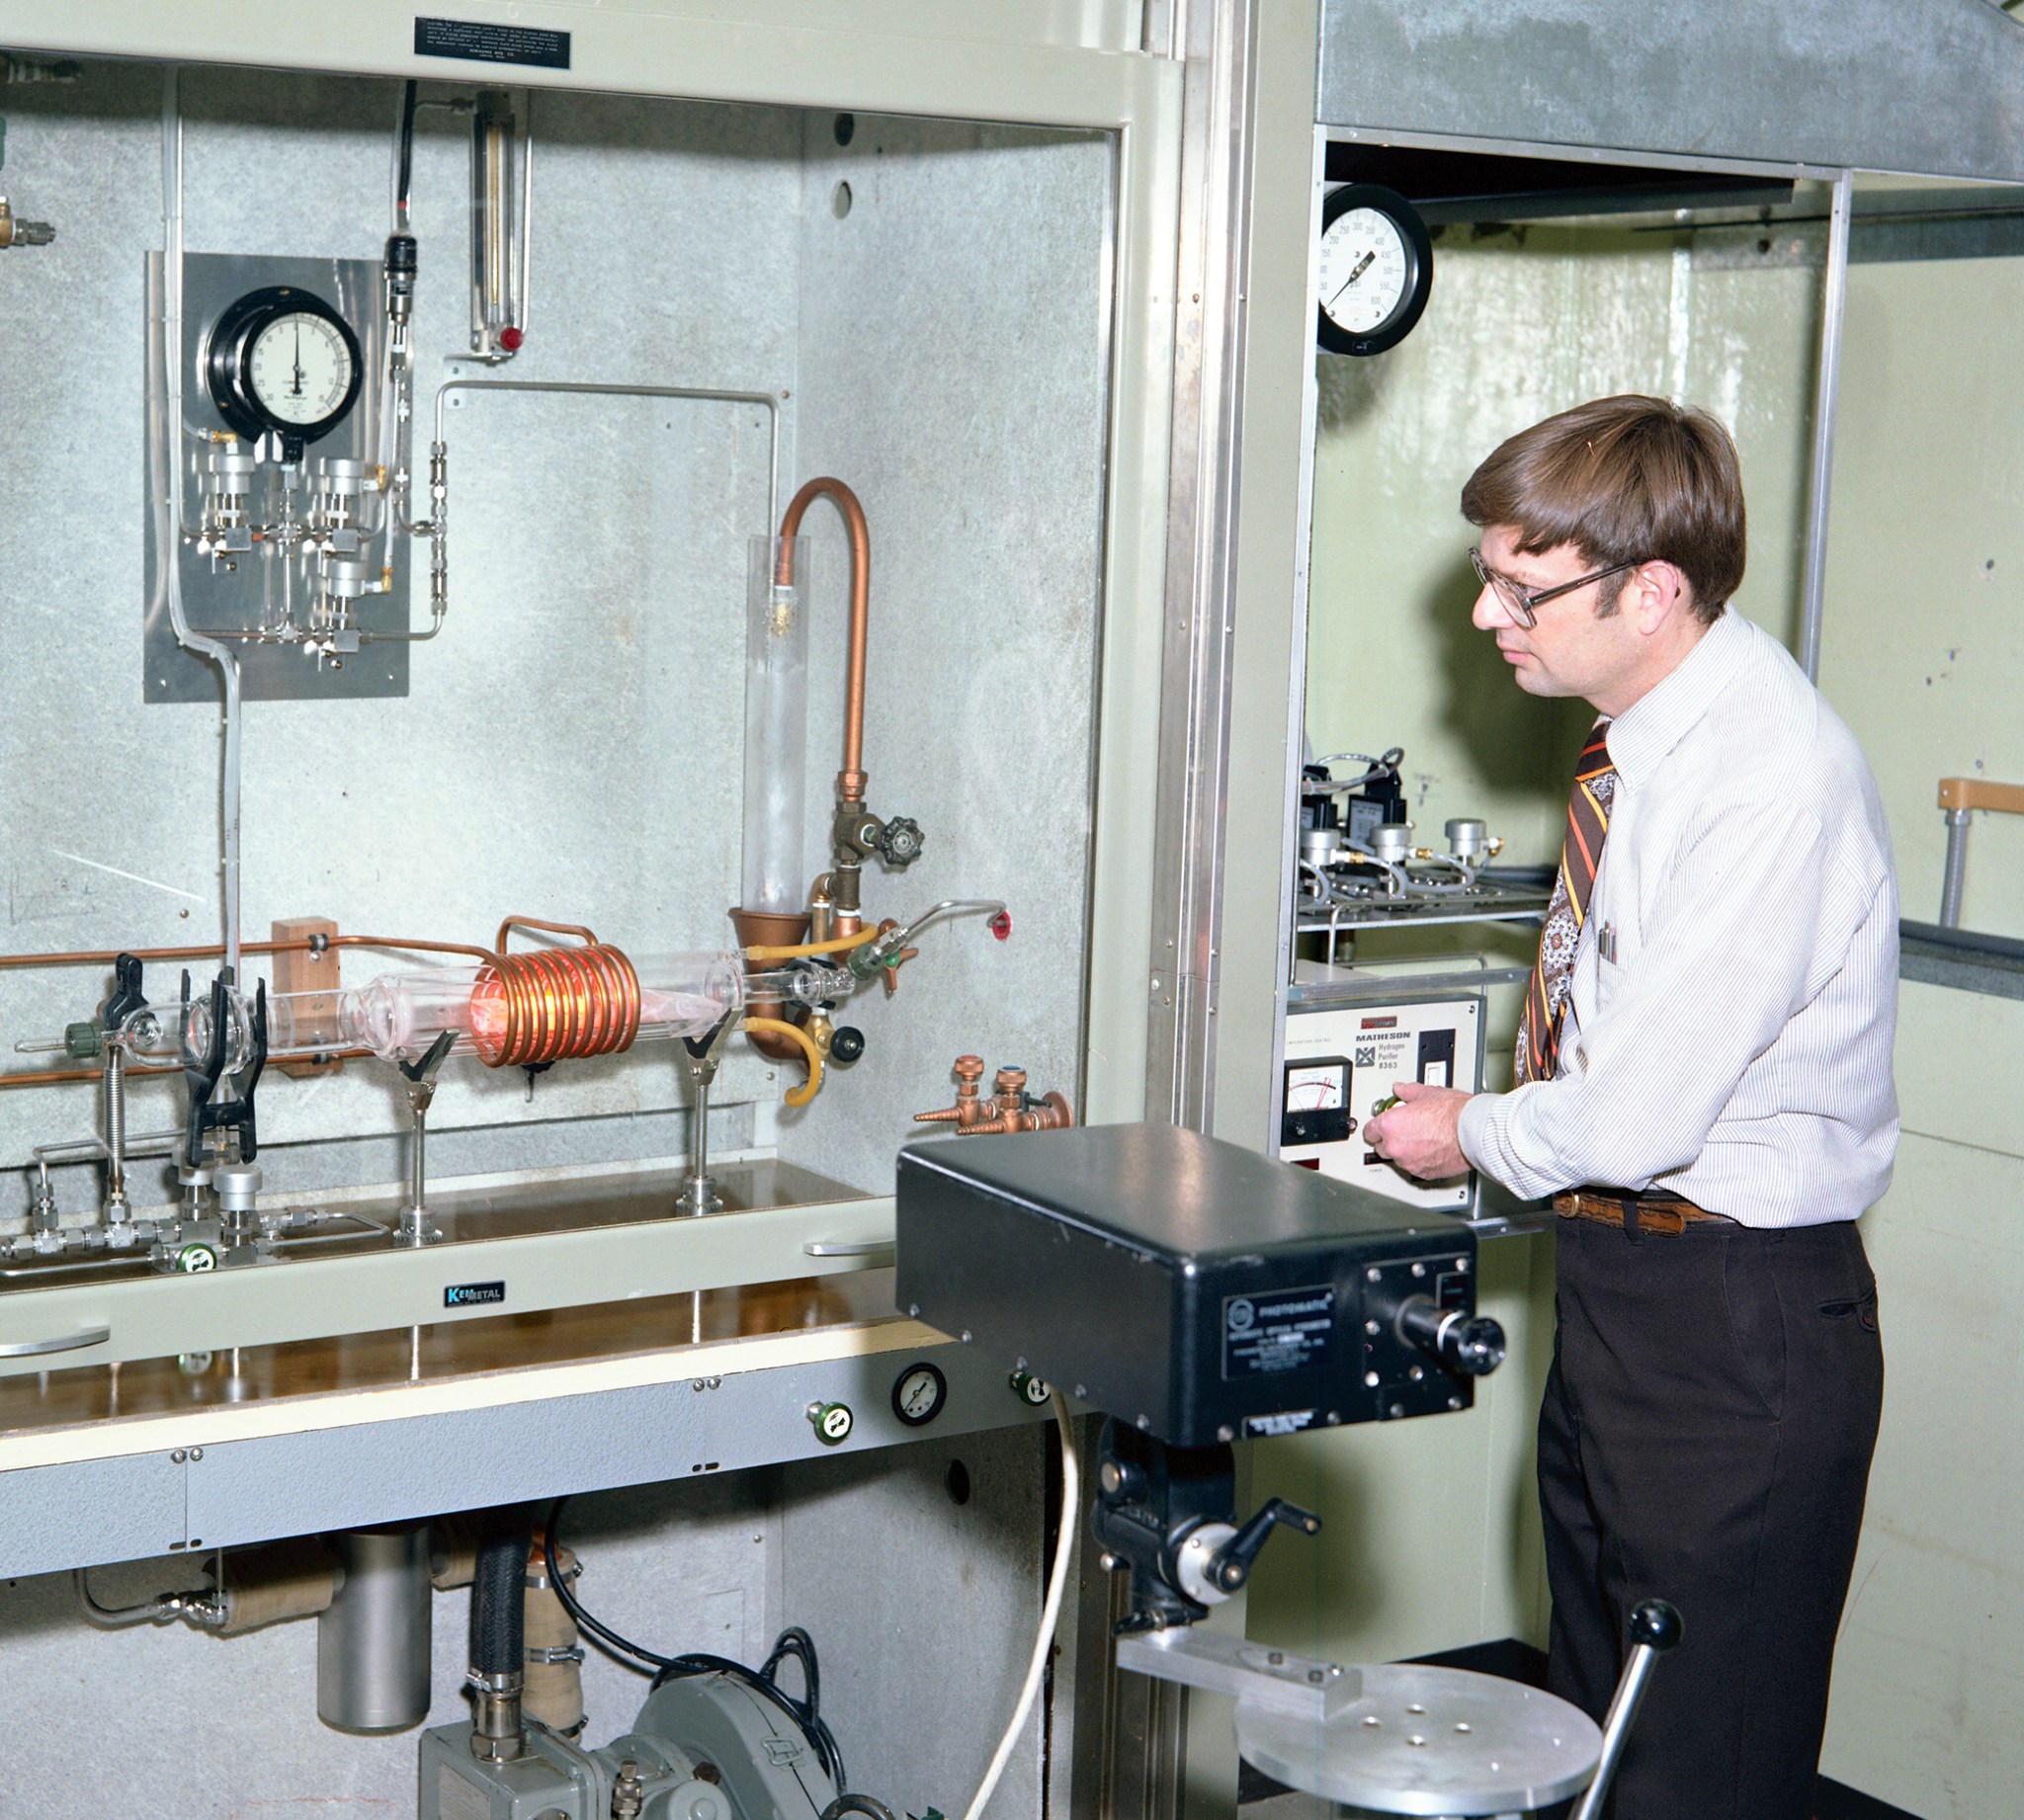 Man working with equipment in lab.